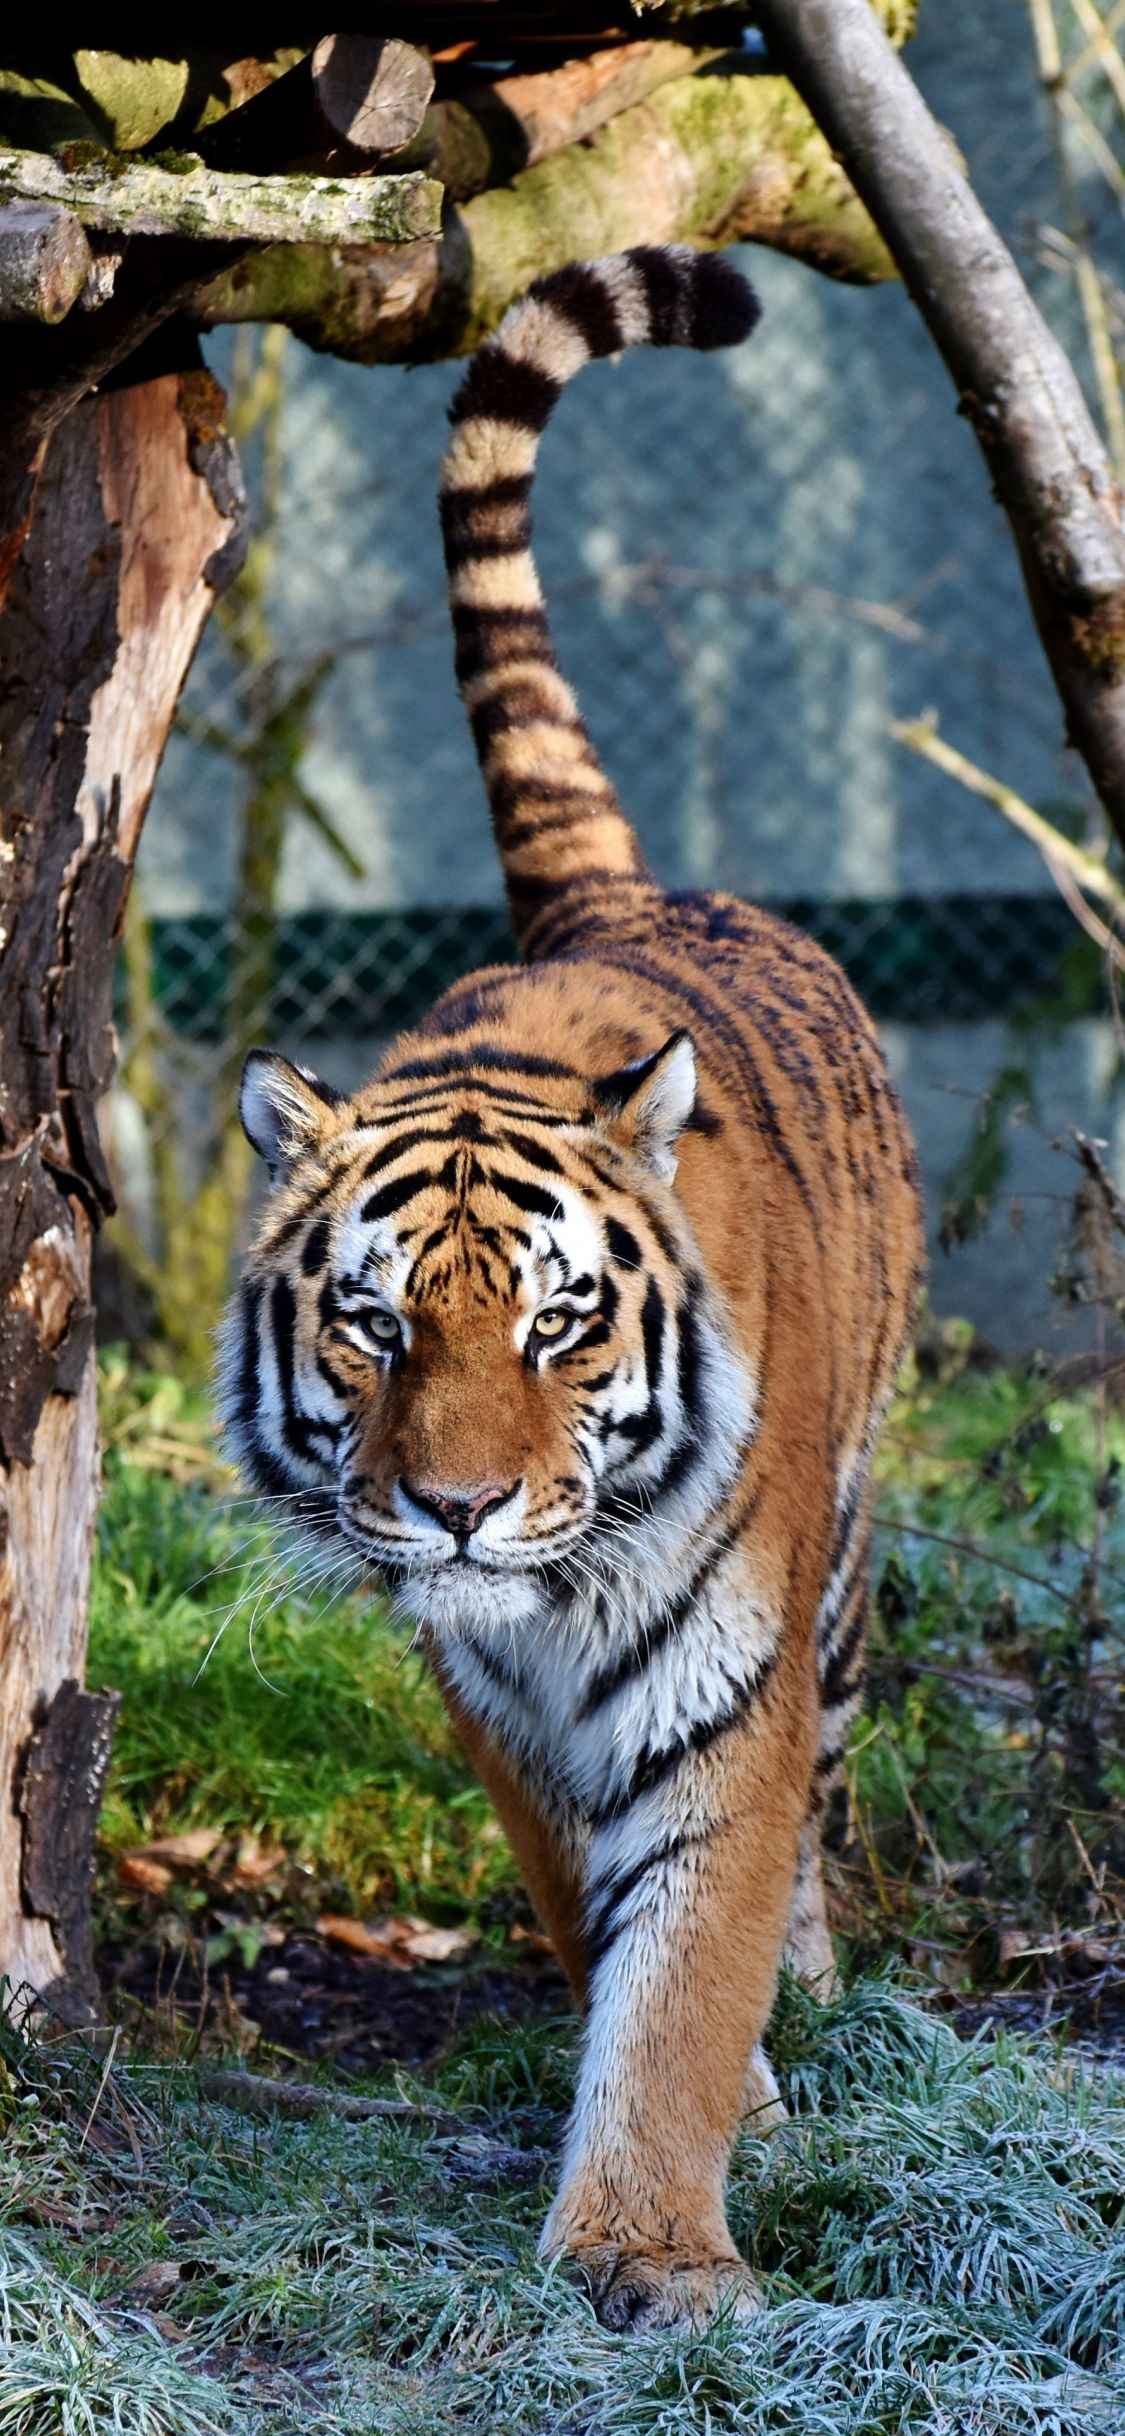 Download 1125x2436 wallpaper tiger, predator, looking straight, zoo, iphone x 1125x2436 HD image, background, 3453